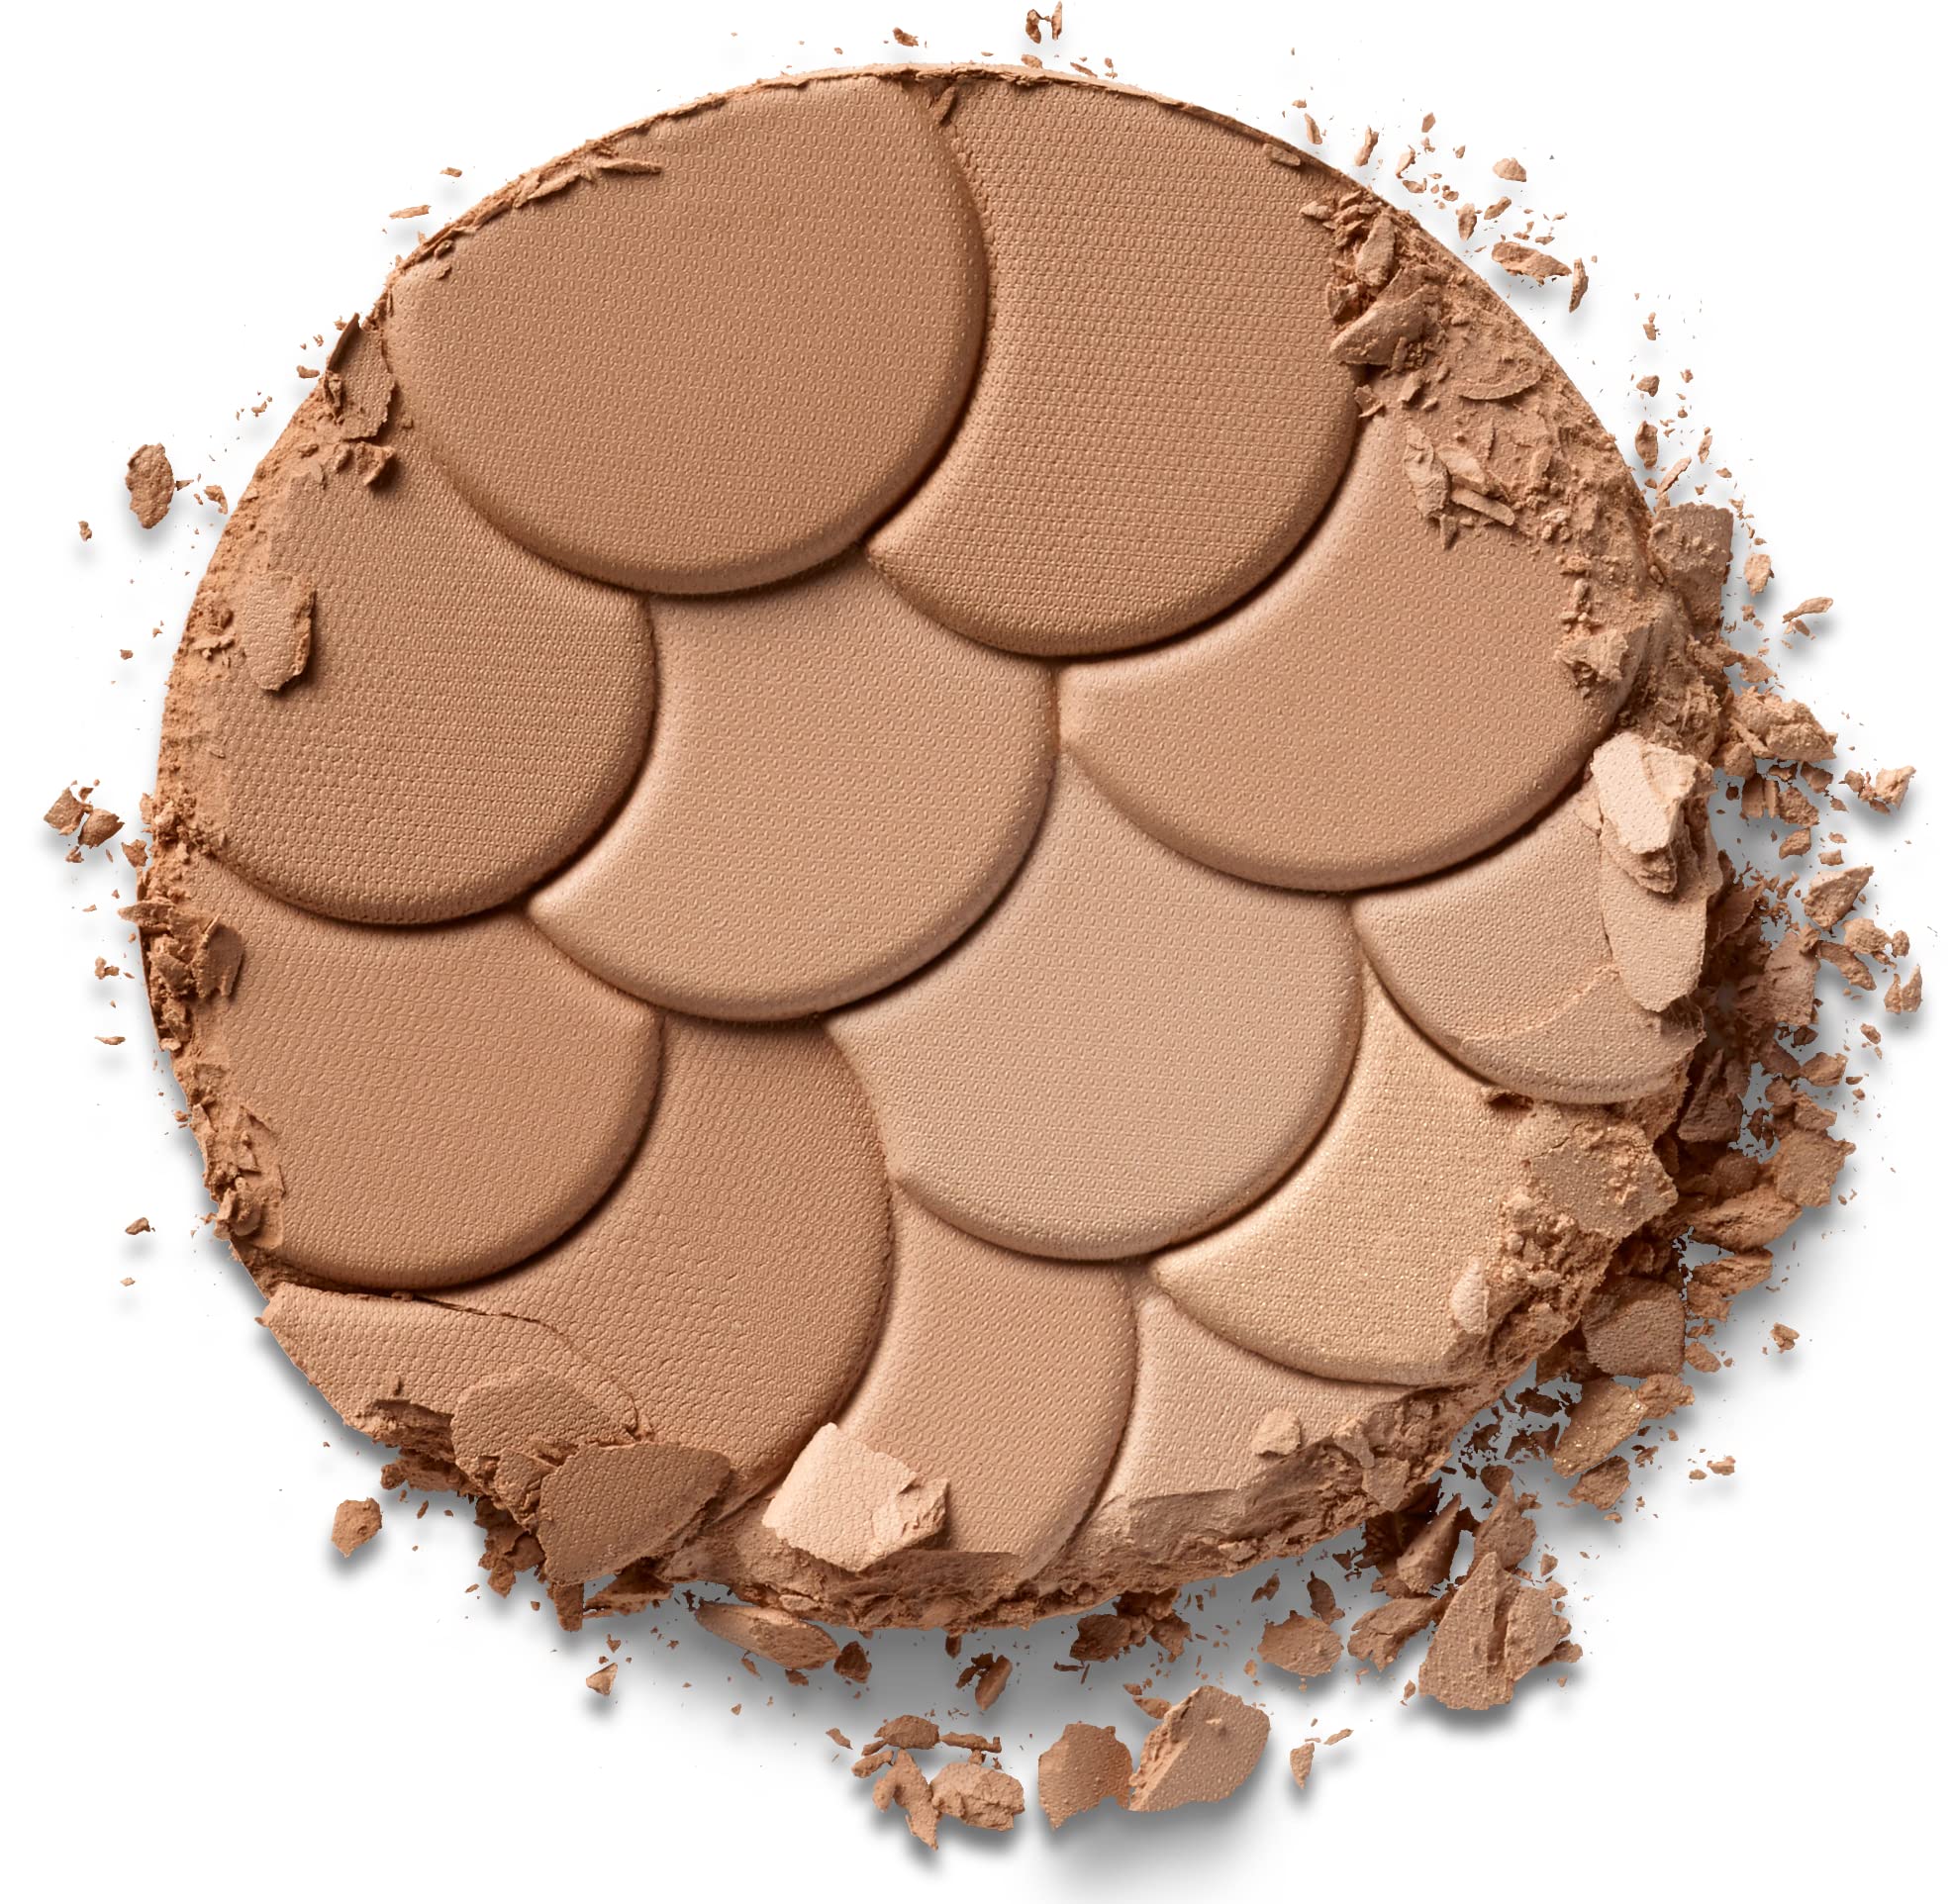 Physicians Formula Magic Mosaic Multi-Colored Bronzer, Highlighting, Contour Powder, Warm Beige/Light Bronzer, Dermatologist Tested, Clinicially Tested